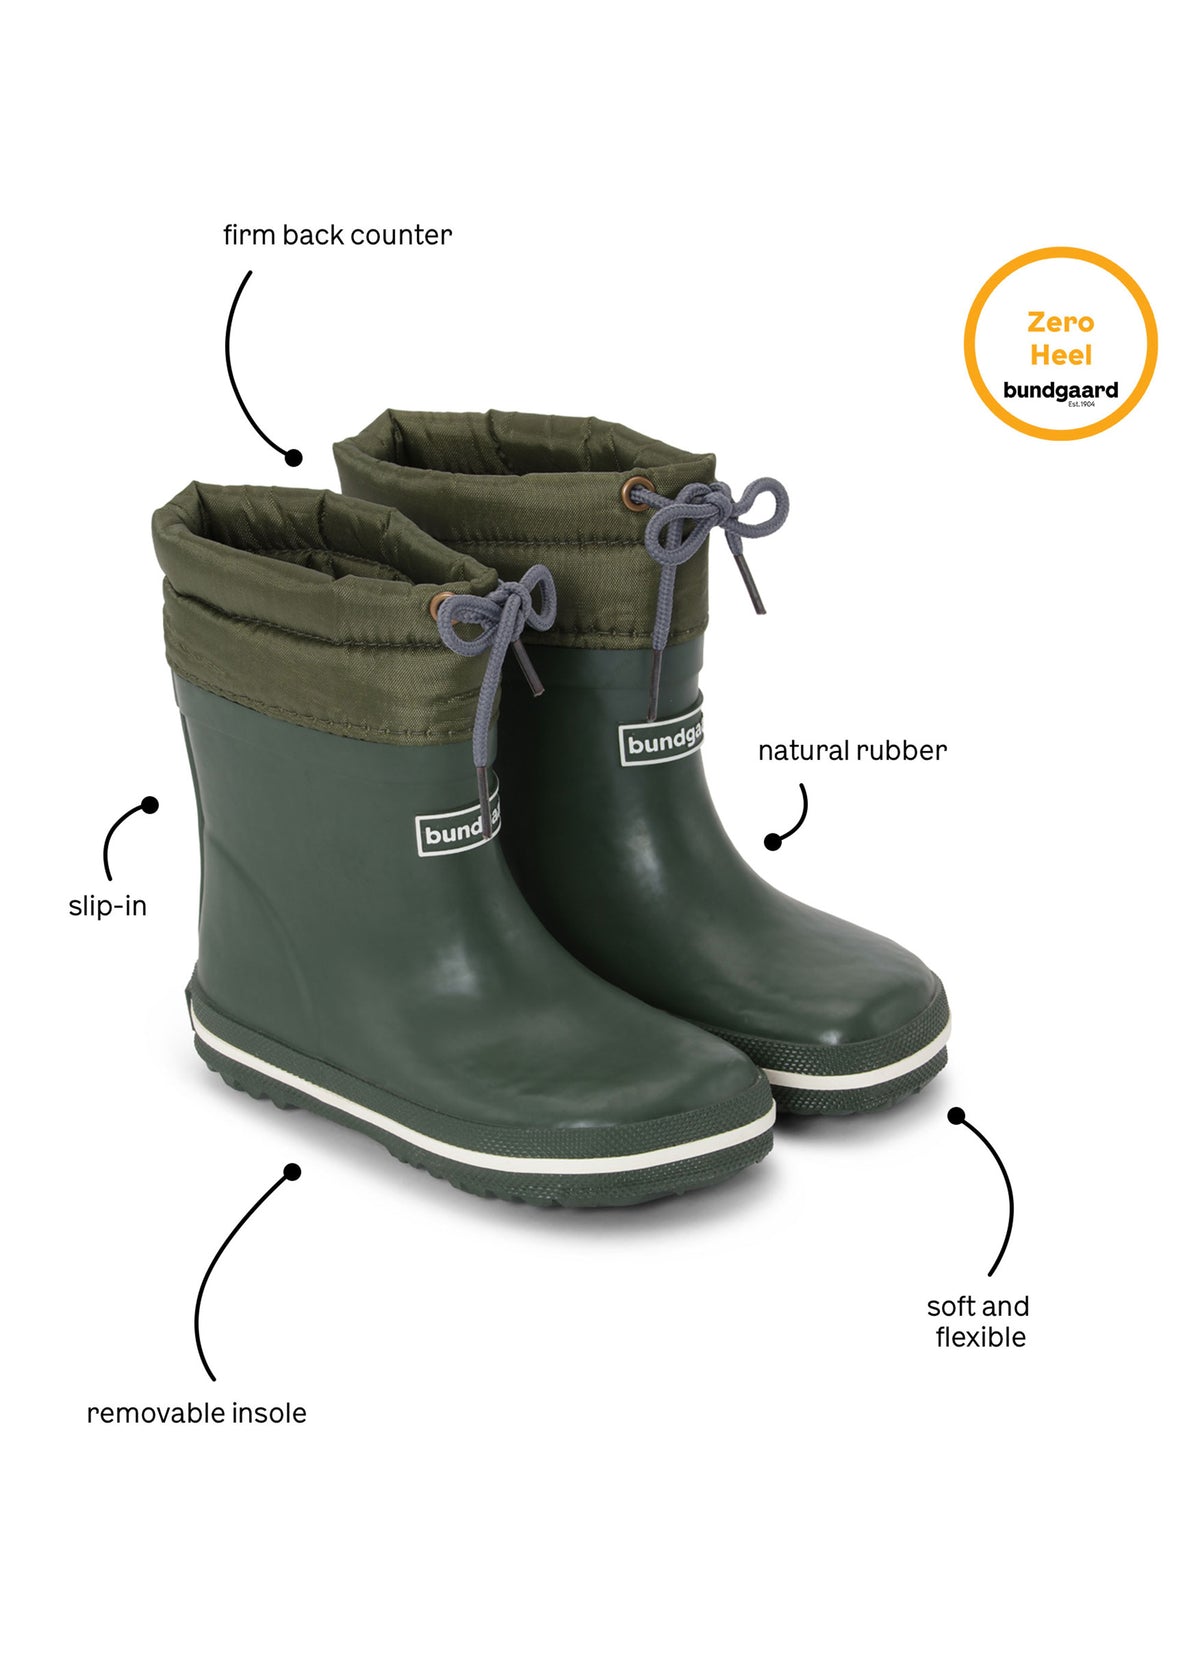 Rubber boots with a warm lining - dark blue, short shaft, drawstrings, Cirro Low Warm